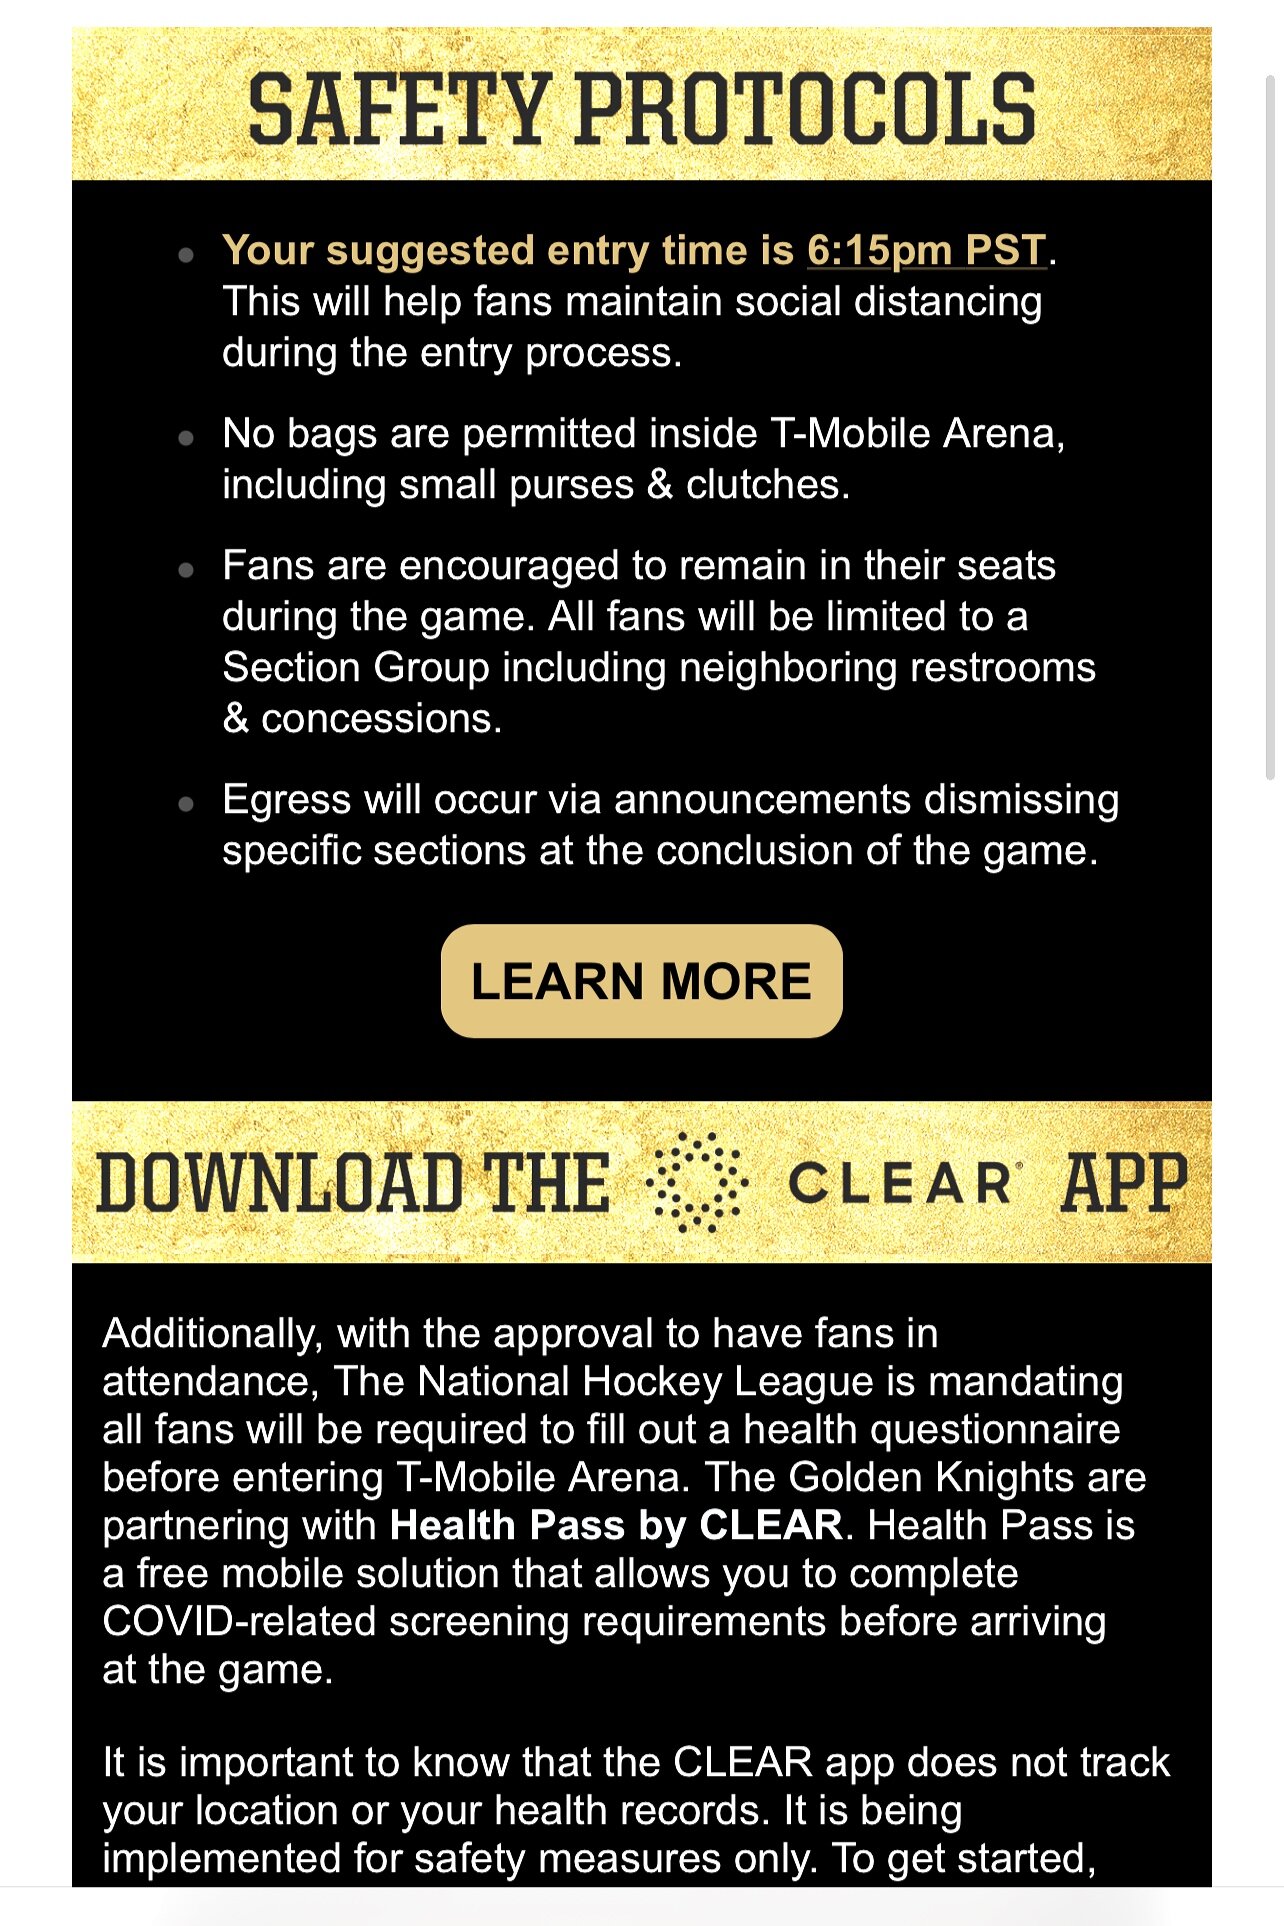 Golden Knights approved for 15% capacity at T-Mobile Arena